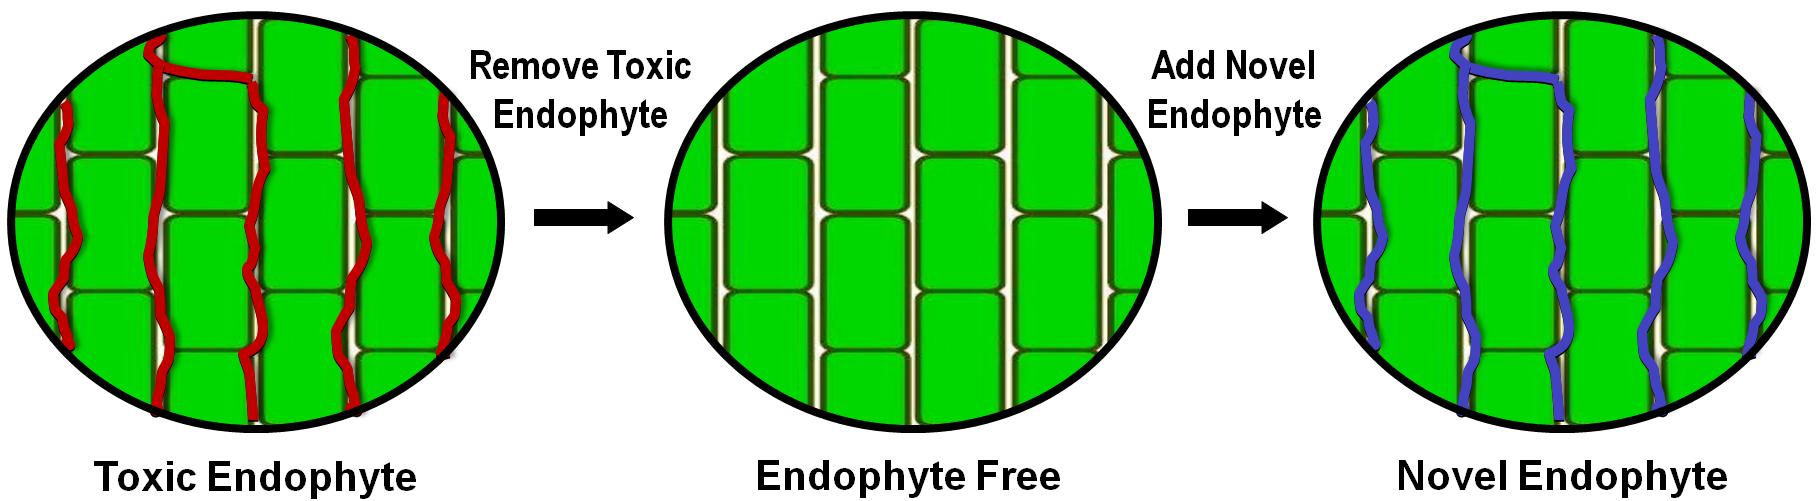 Figure 1. Hyphae of the fungal endophyte grow between the cells (green) of the tall fescue plant. When building a novel endophyte-infected tall fescue, the toxic endophyte (red lines) is removed from the tall fescue plant to create an endophyte-free plant. Then, the novel endophyte (blue lines) is introduced into the plant.